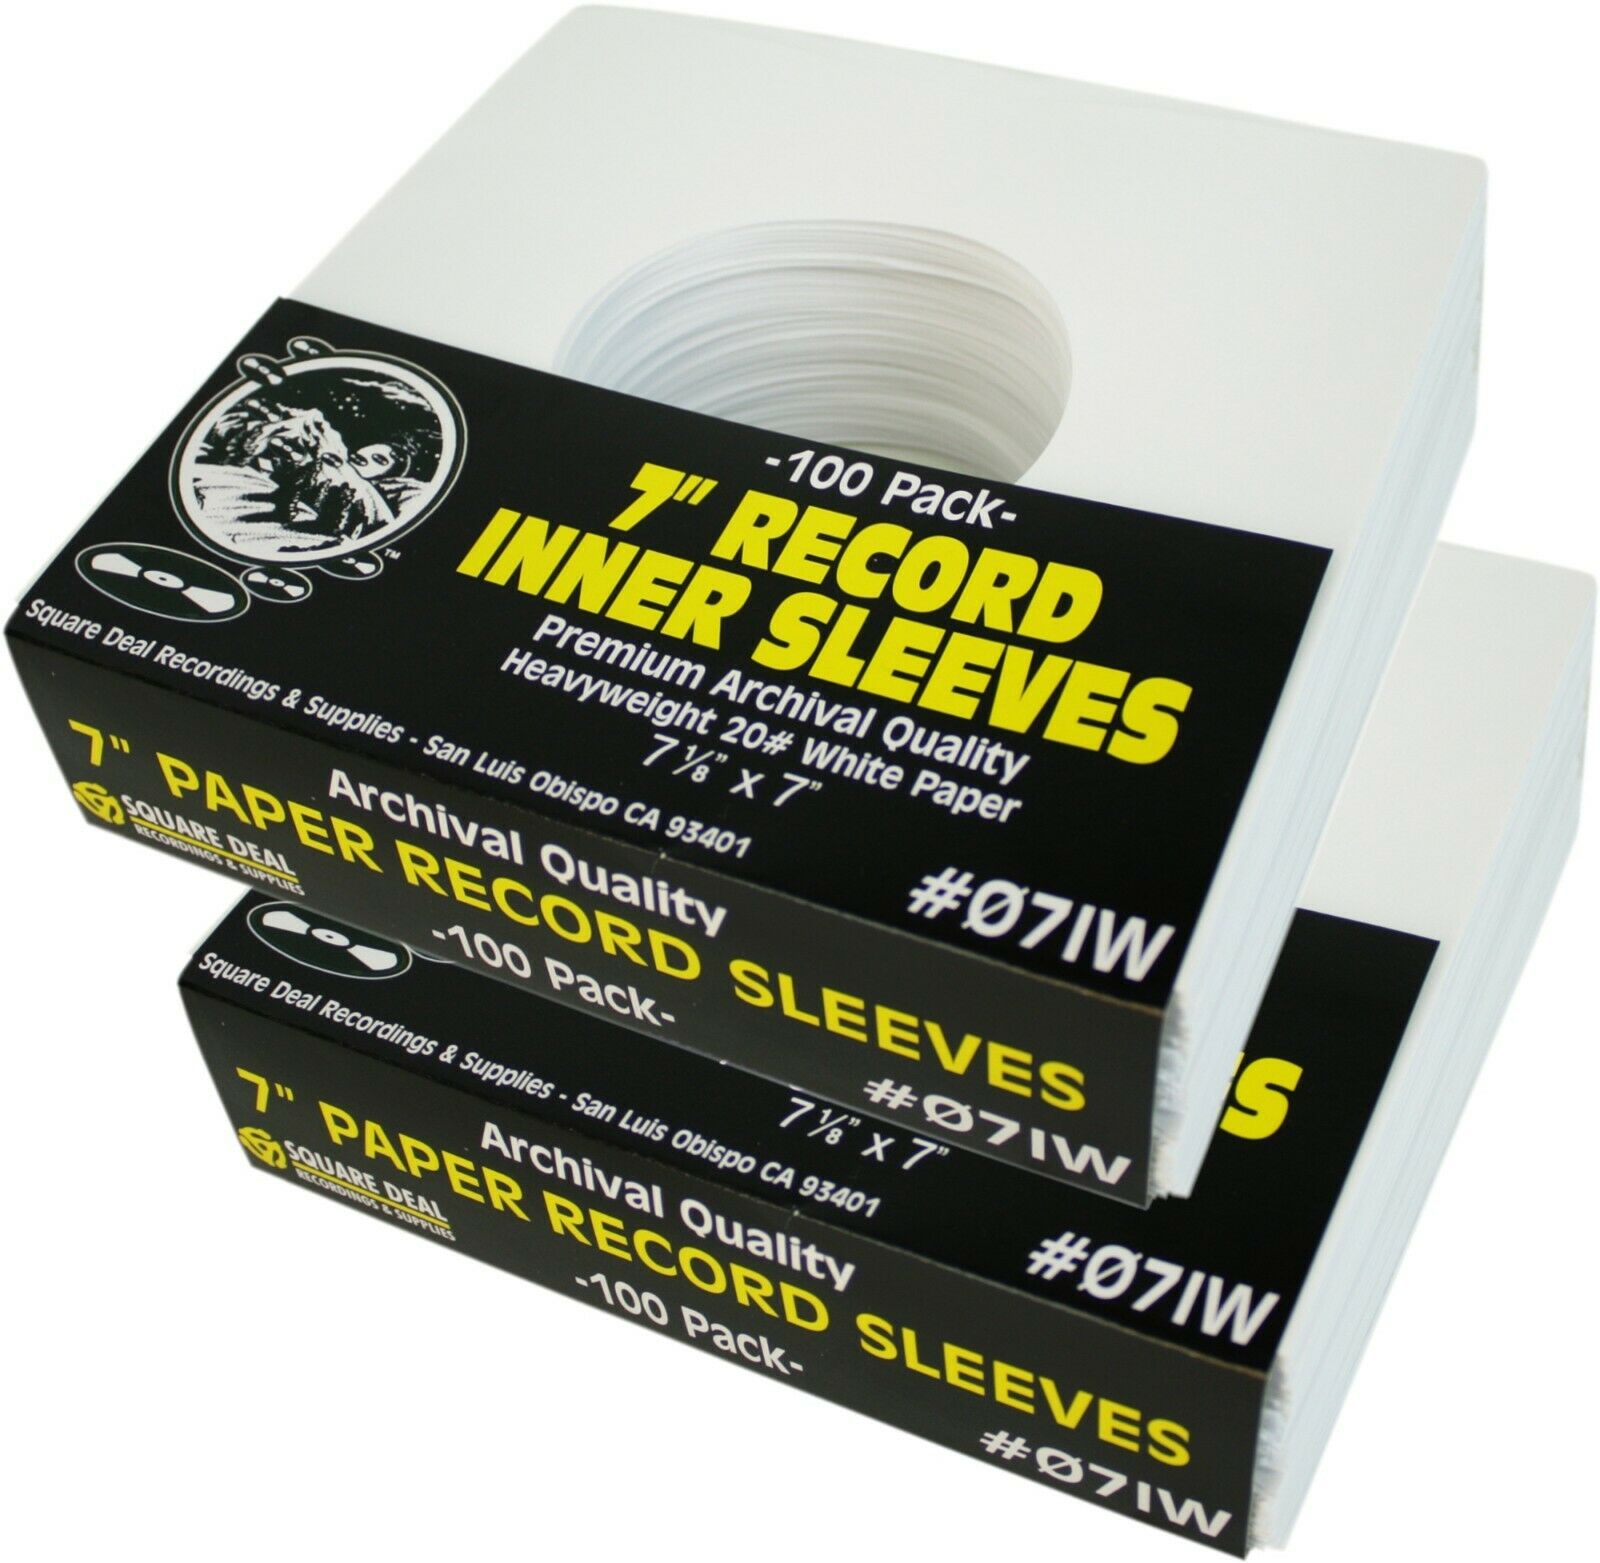 (200) 7" Record Inner Sleeves - White Archival Paper Acid Free 45rpm - #07iw